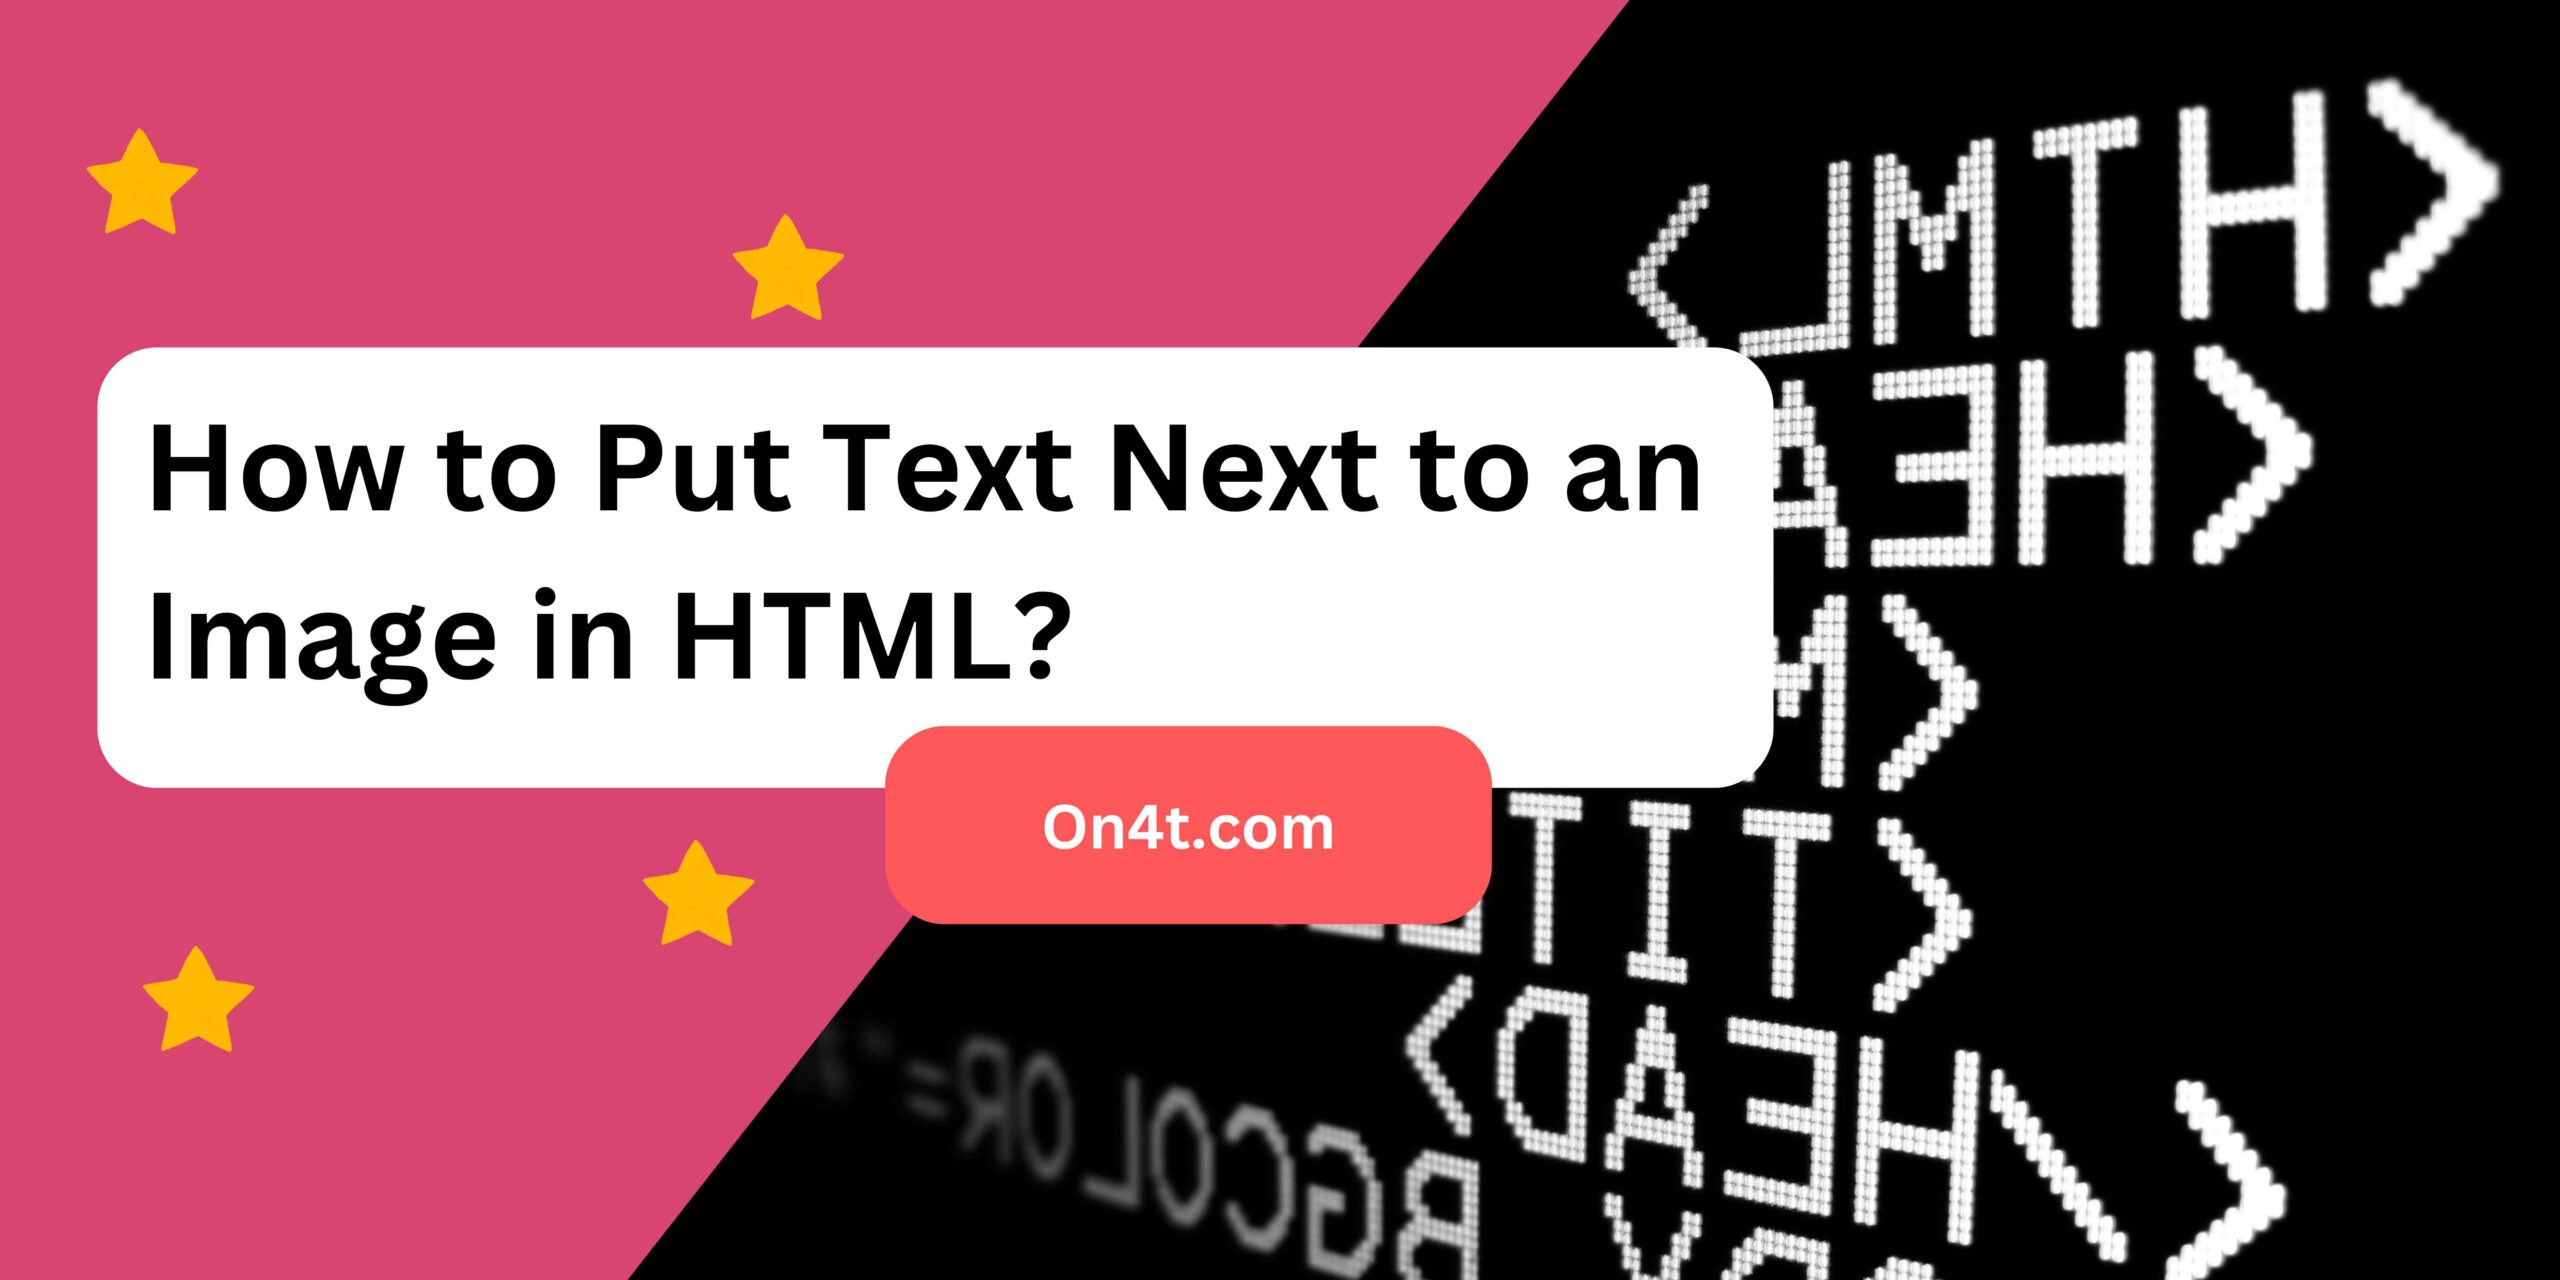 How to Put Text Next to an Image in HTML